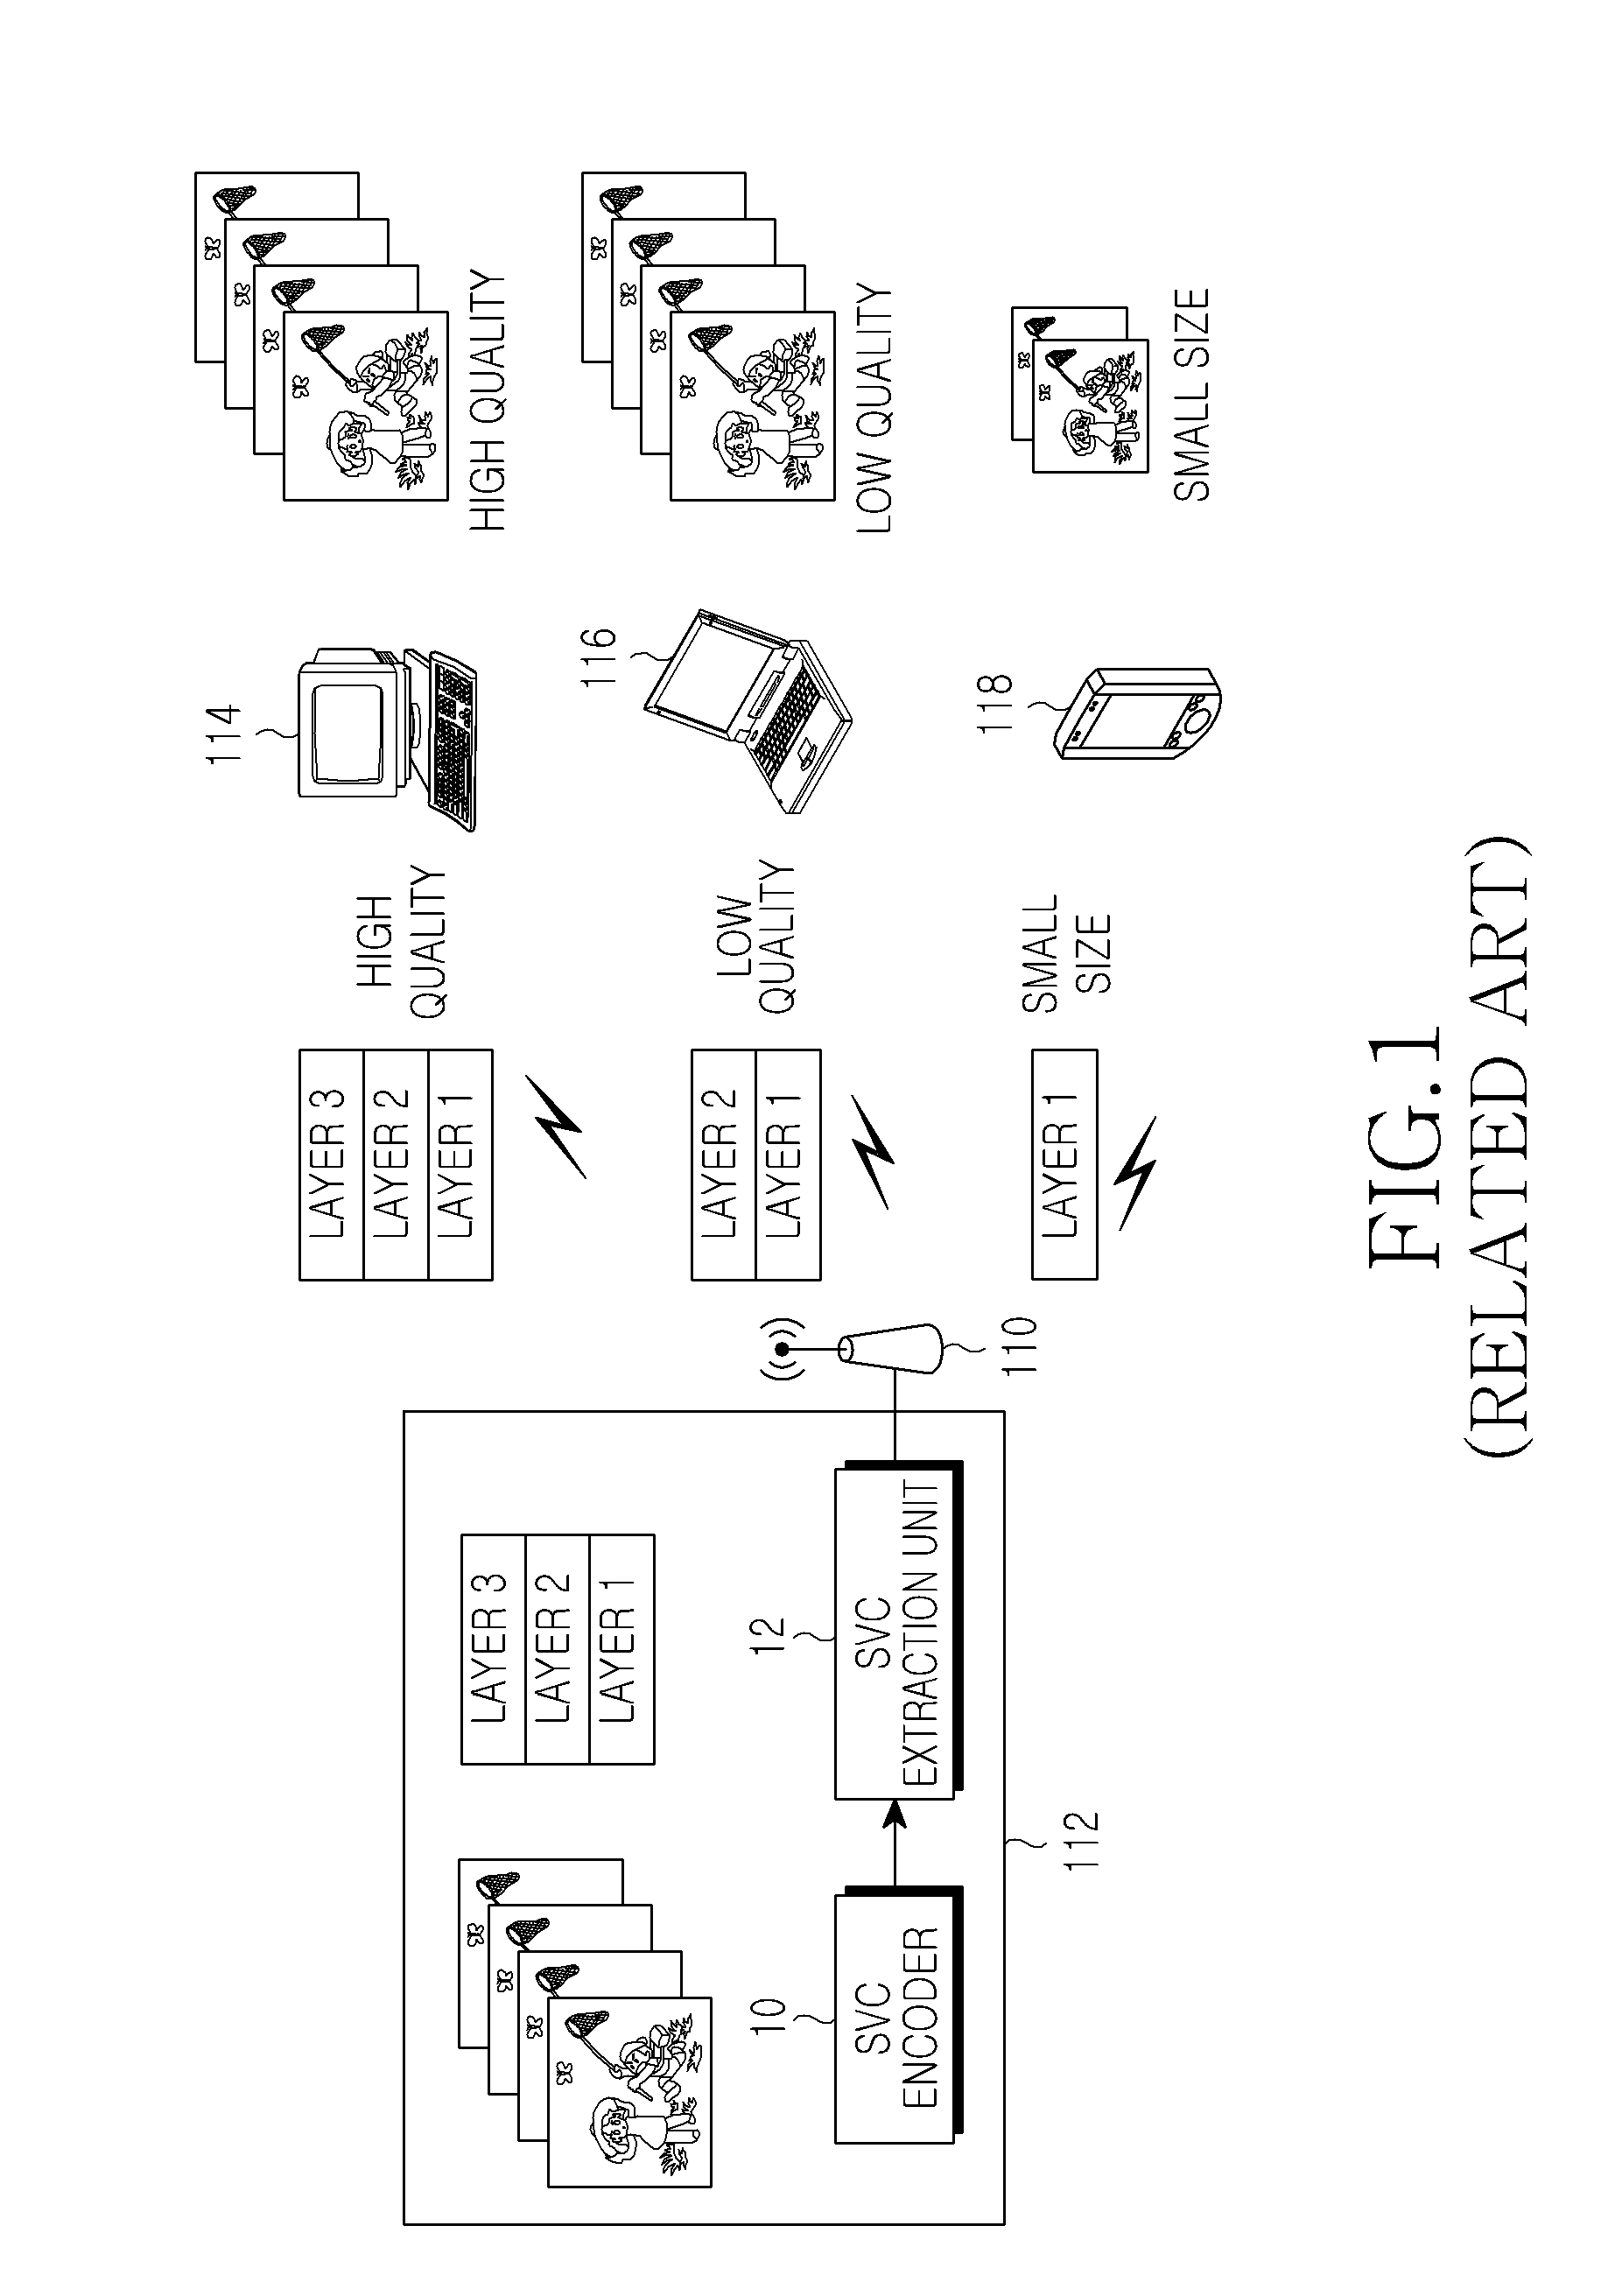 Channel adaptive video transmission method, apparatus using the same, and system providing the same